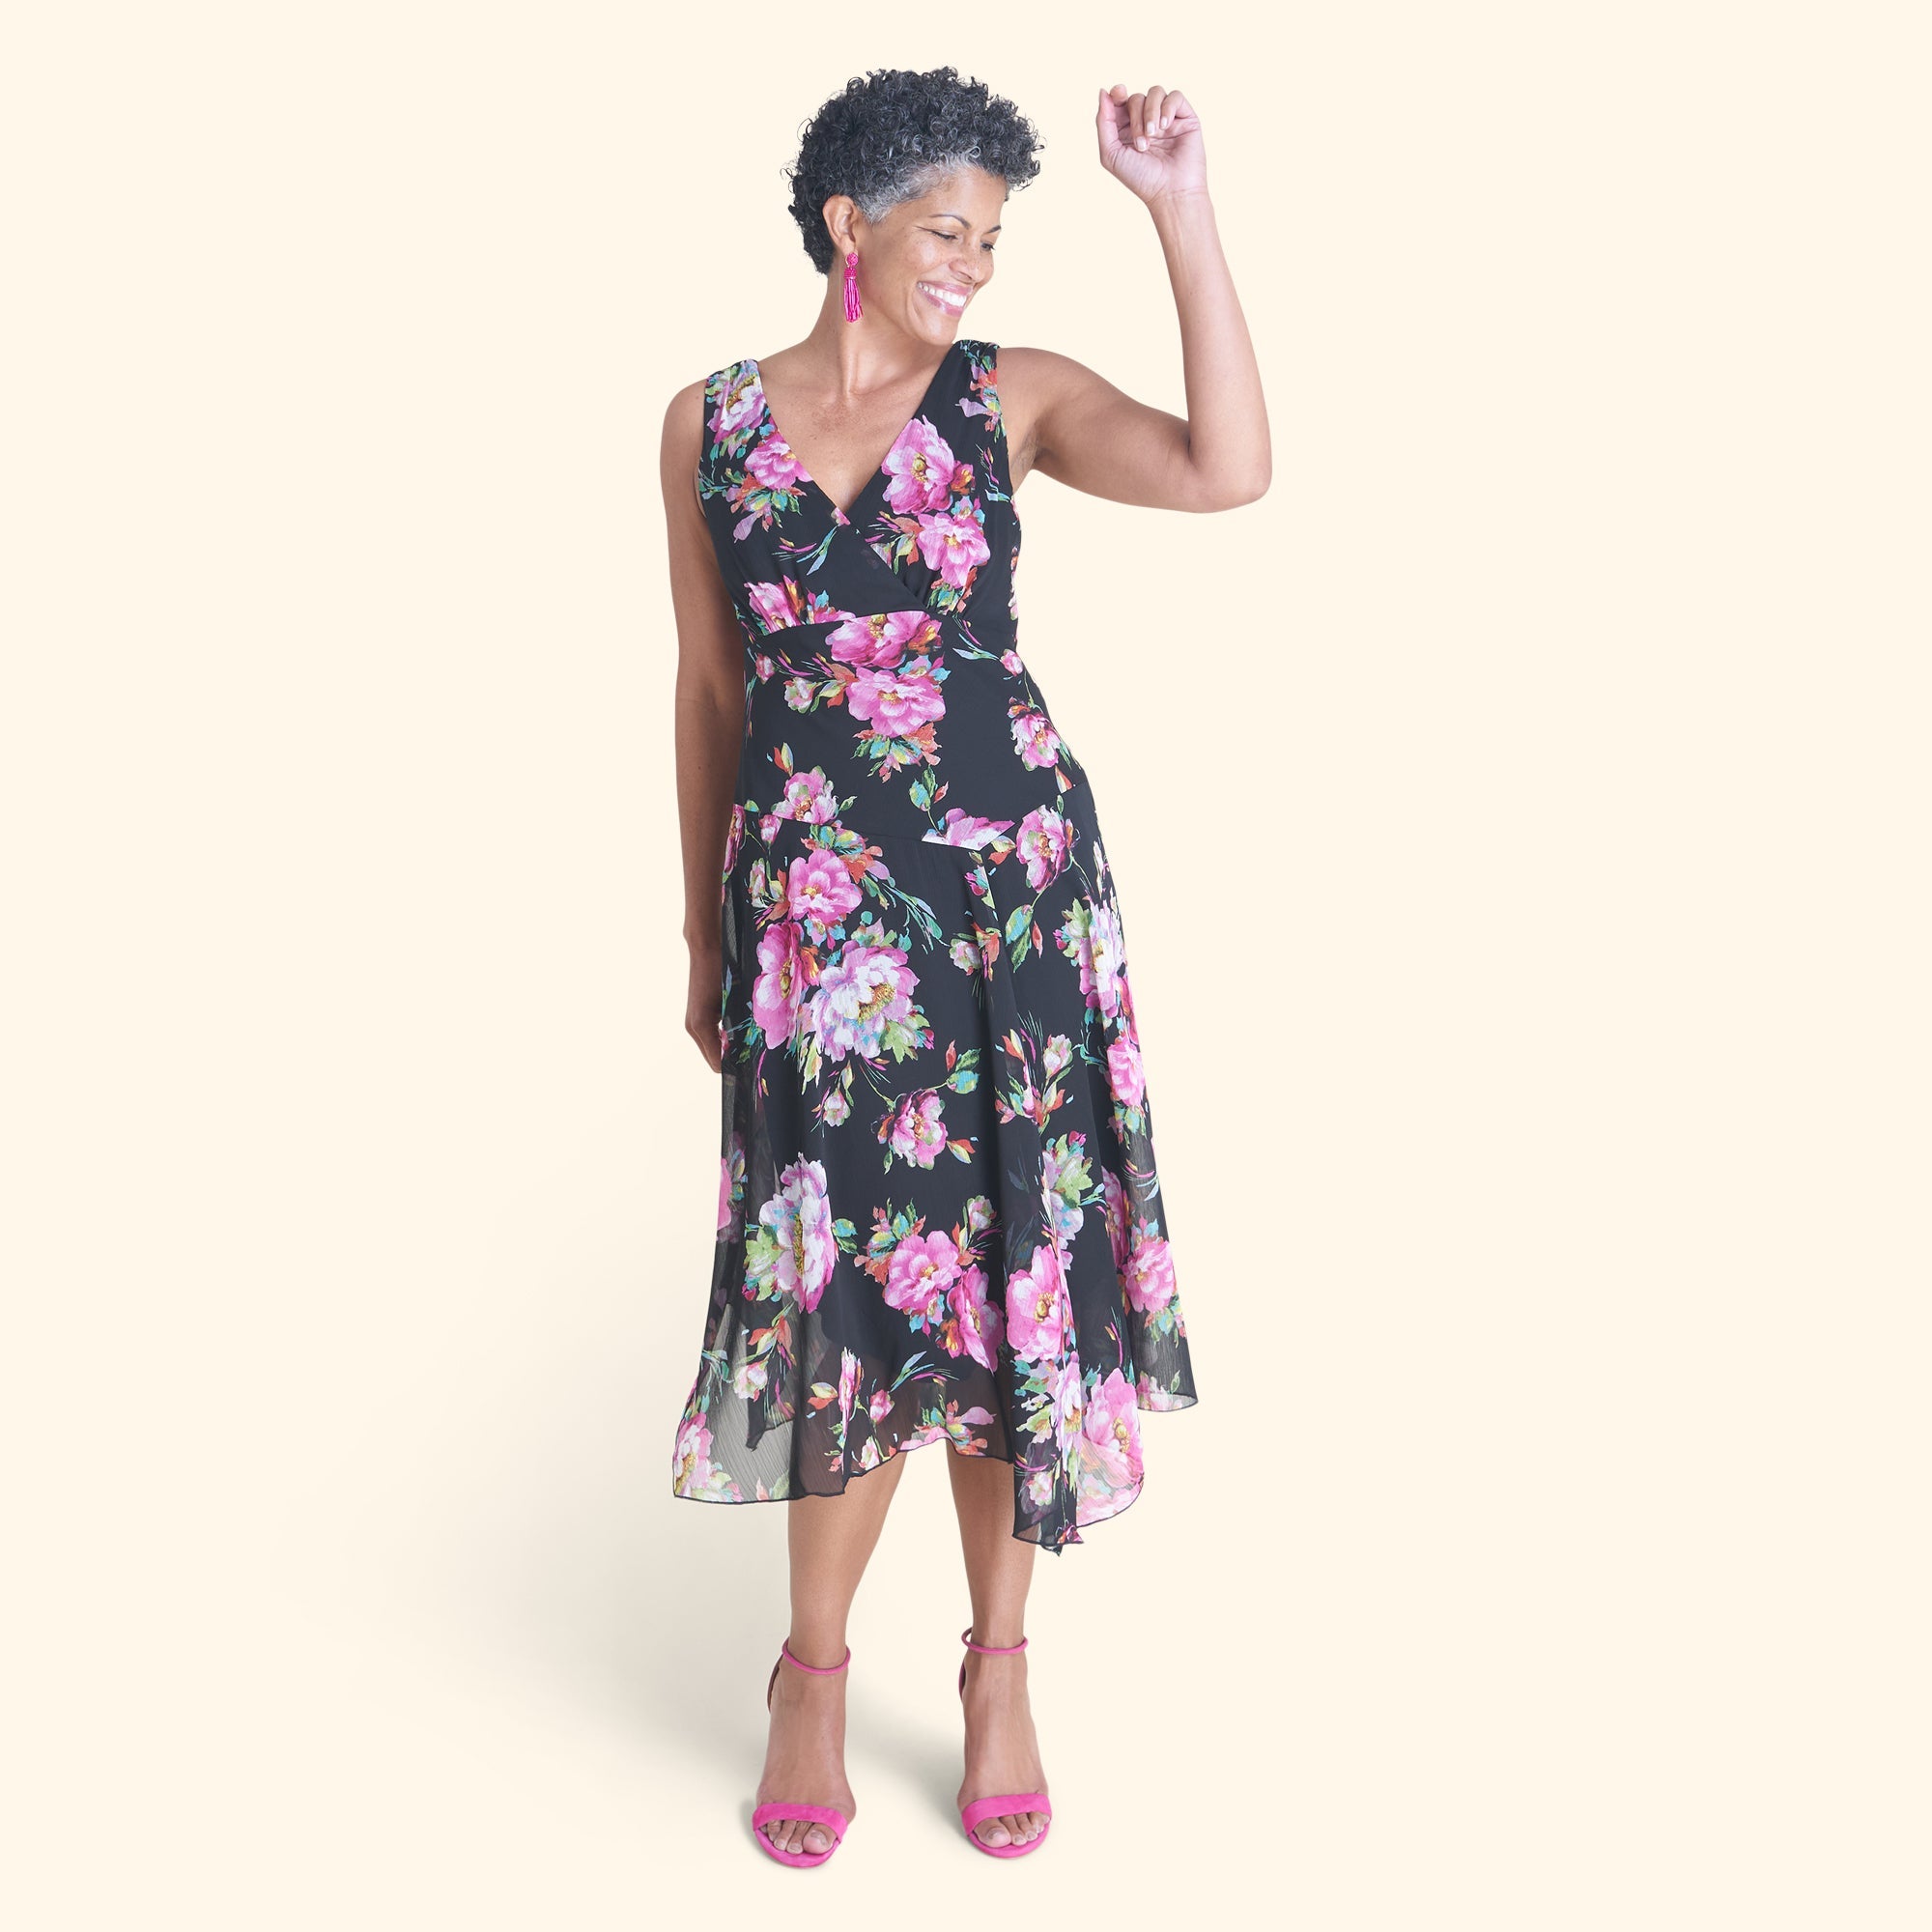 Woman posing wearing Black Audrey Floral Surplice Asymmetrical Midi Dress from Connected Apparel